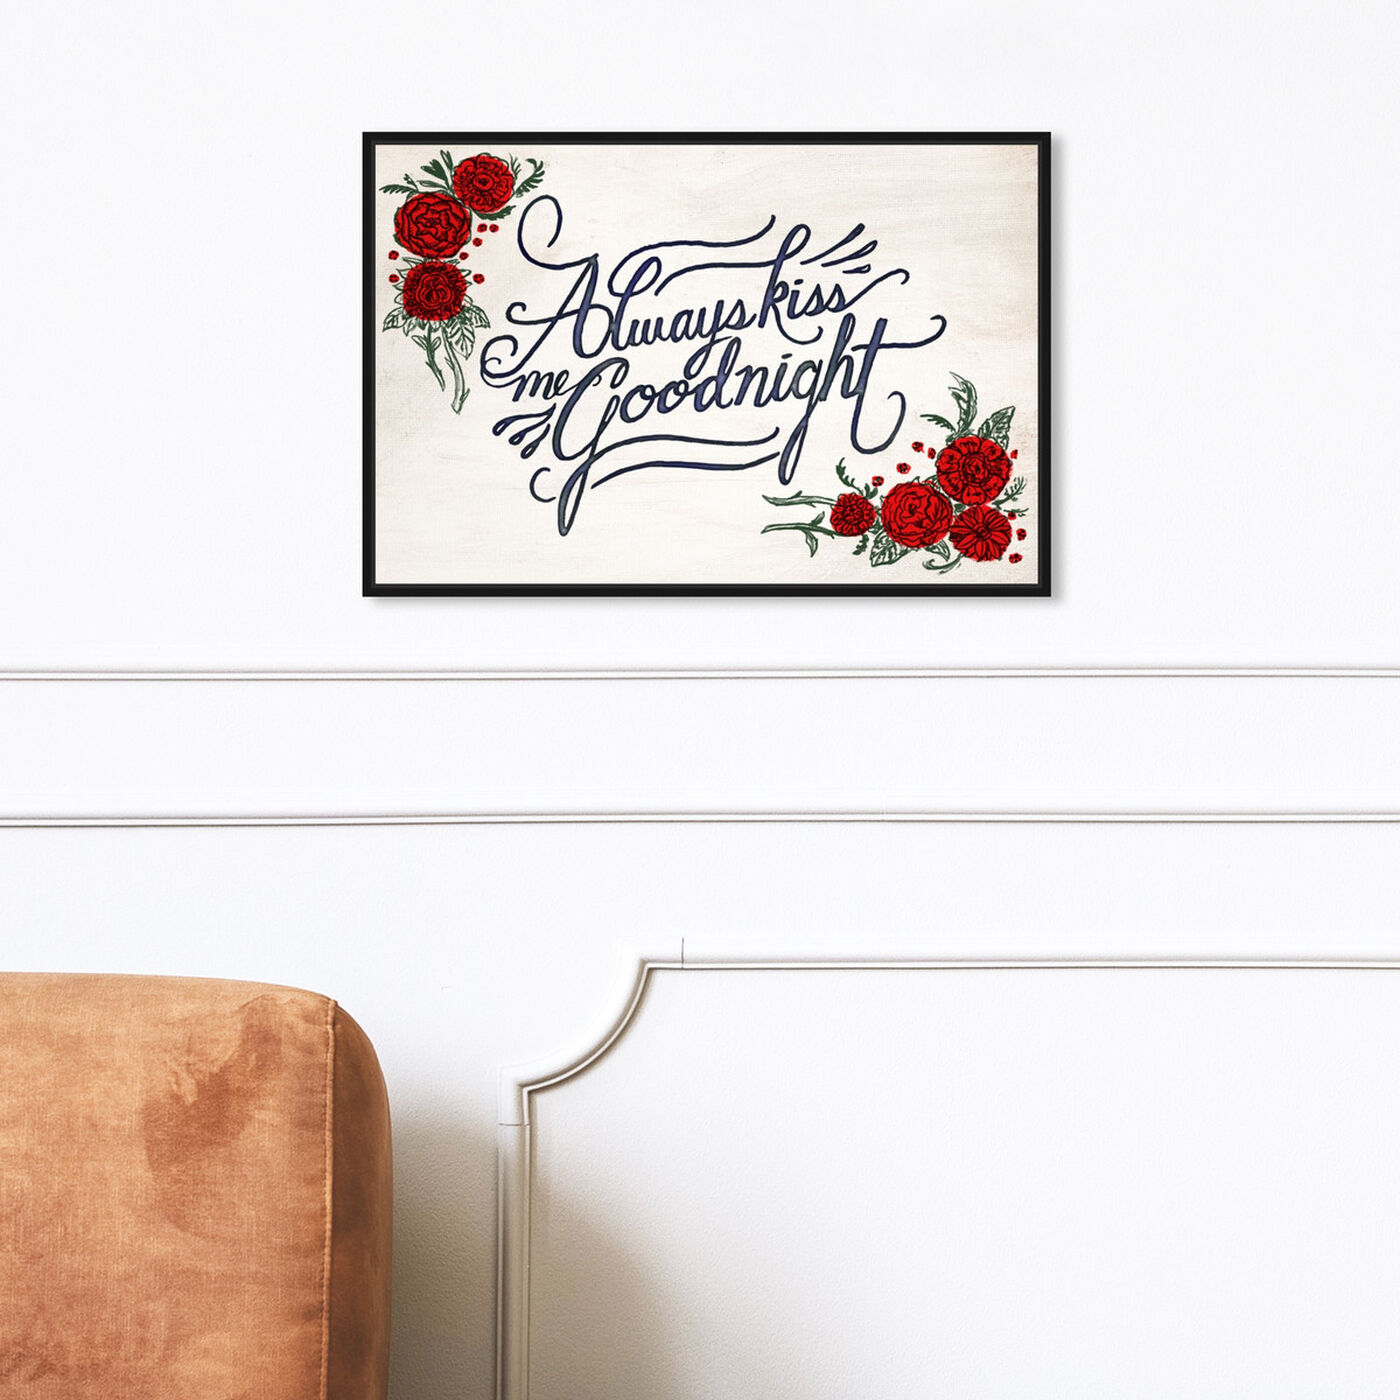 Hanging view of Goodnight featuring typography and quotes and love quotes and sayings art.